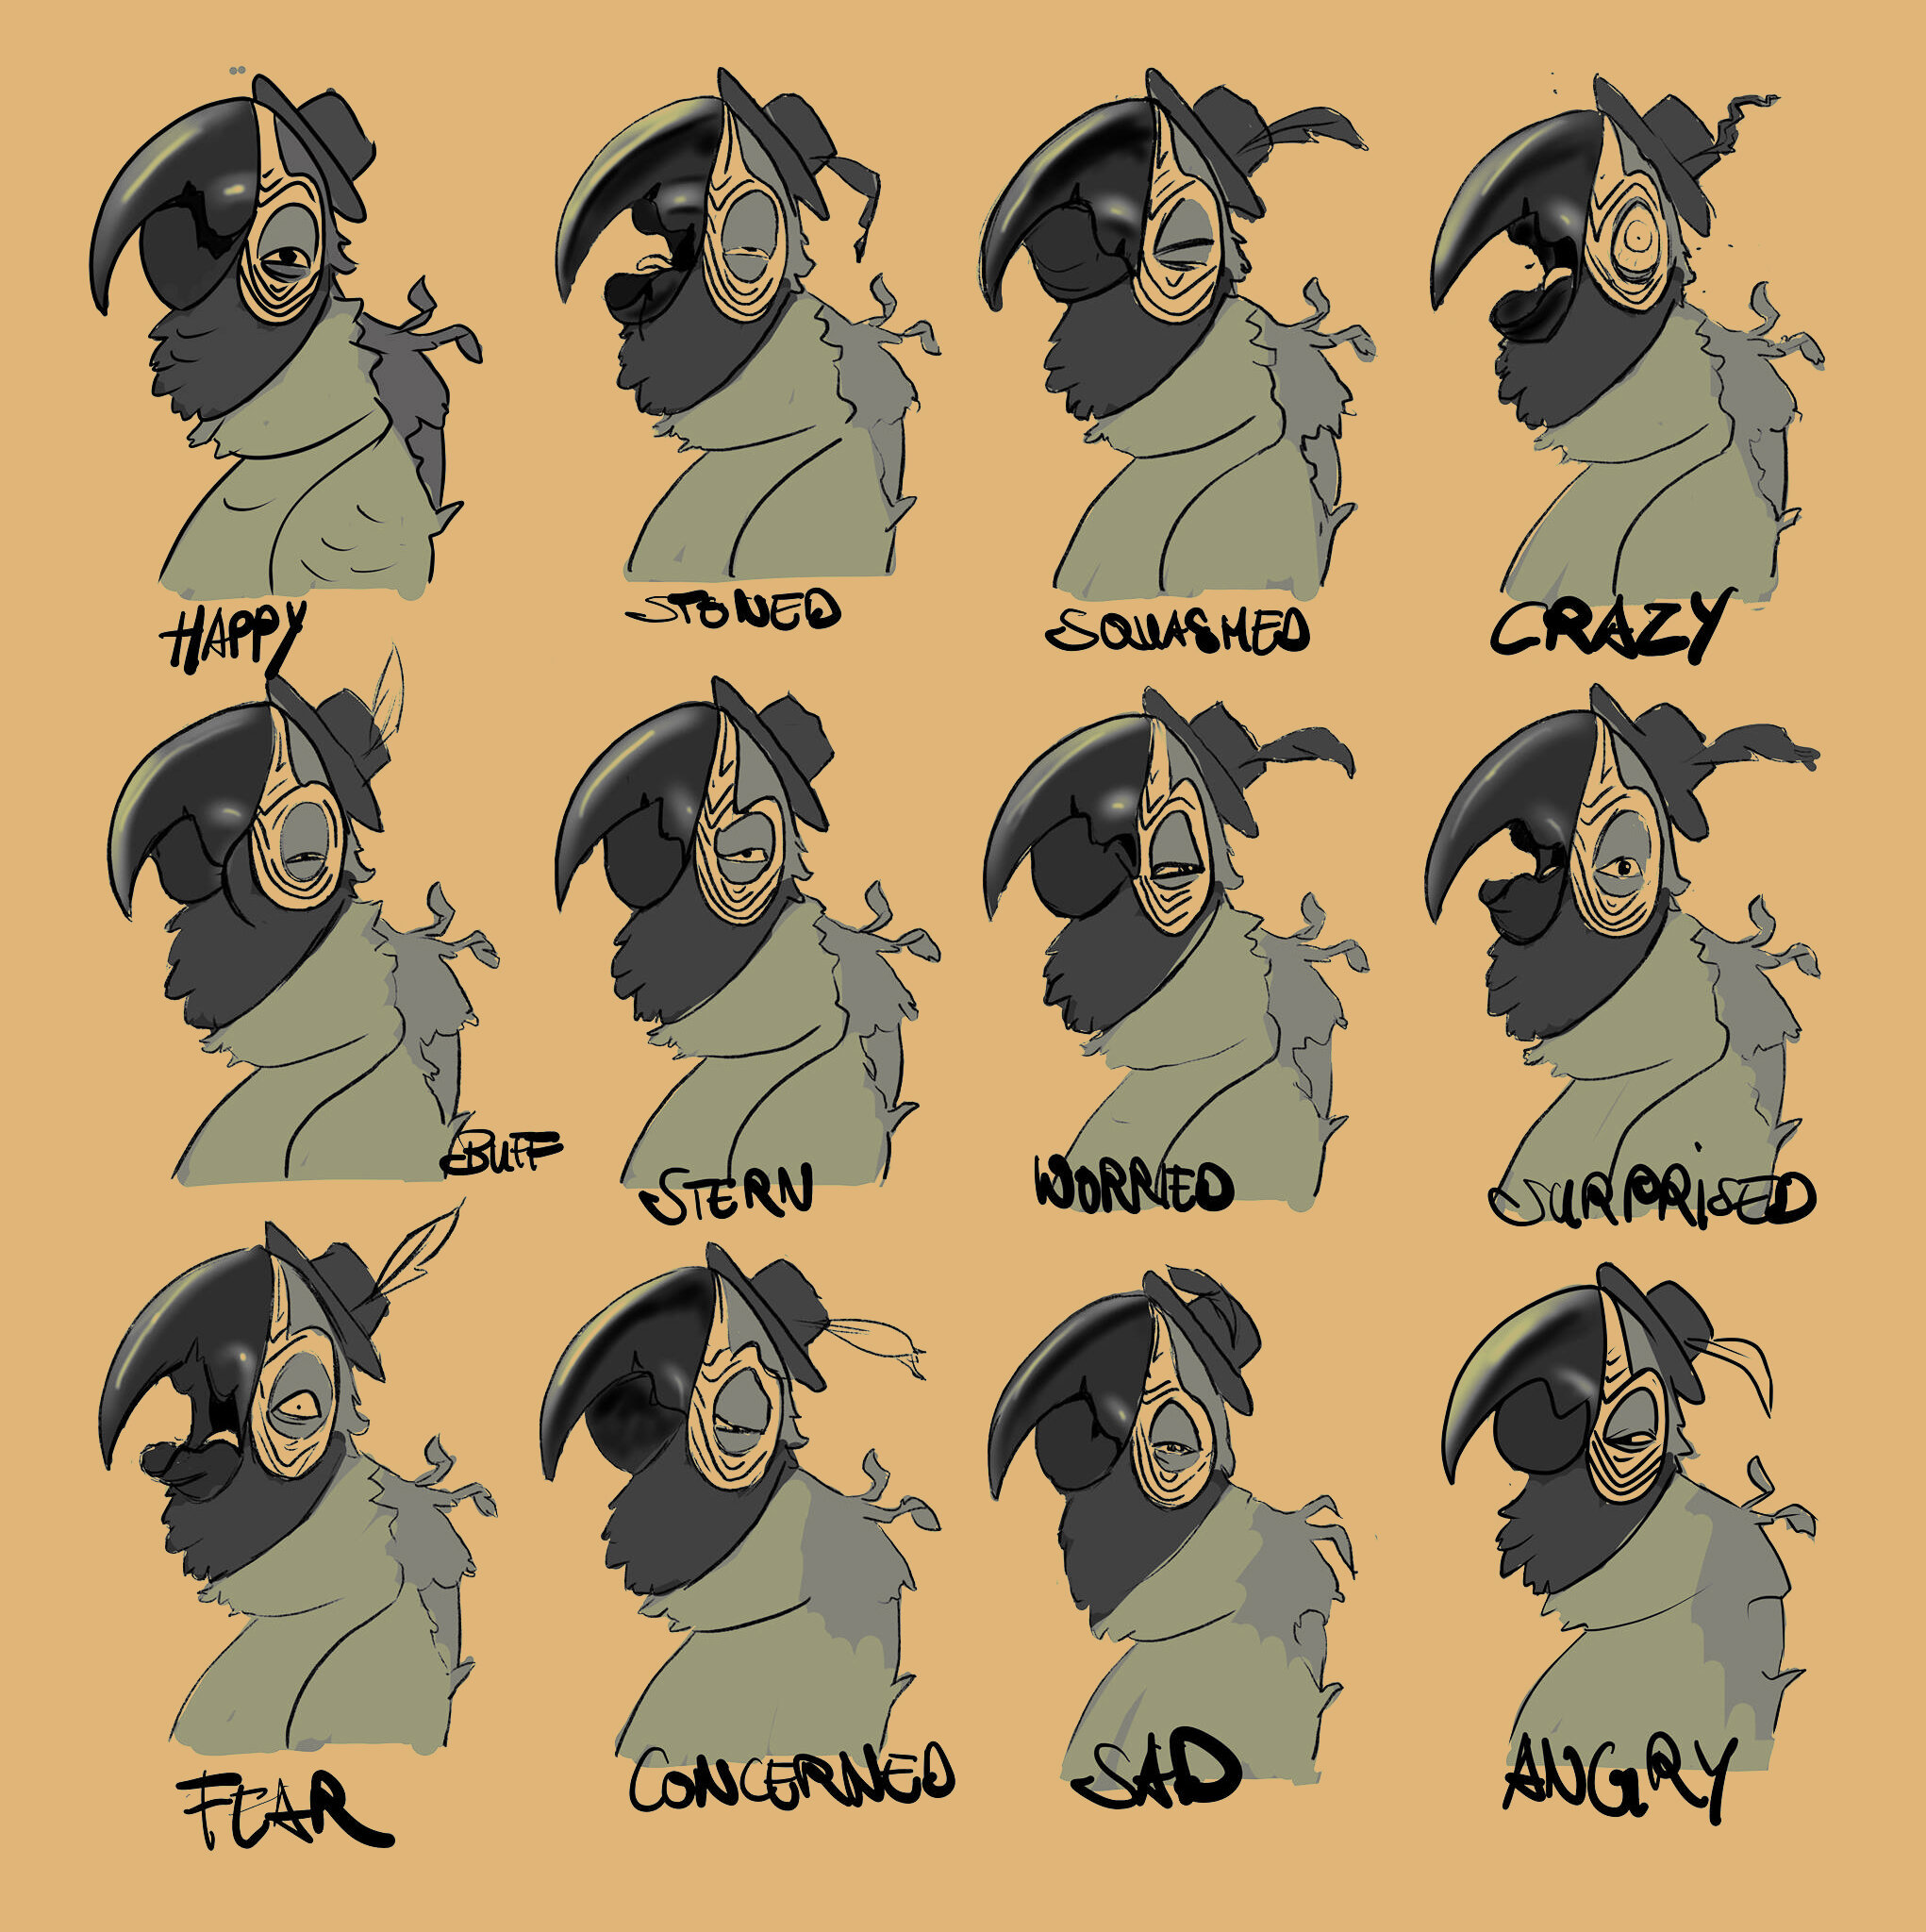 Polly_Expressions.jpg